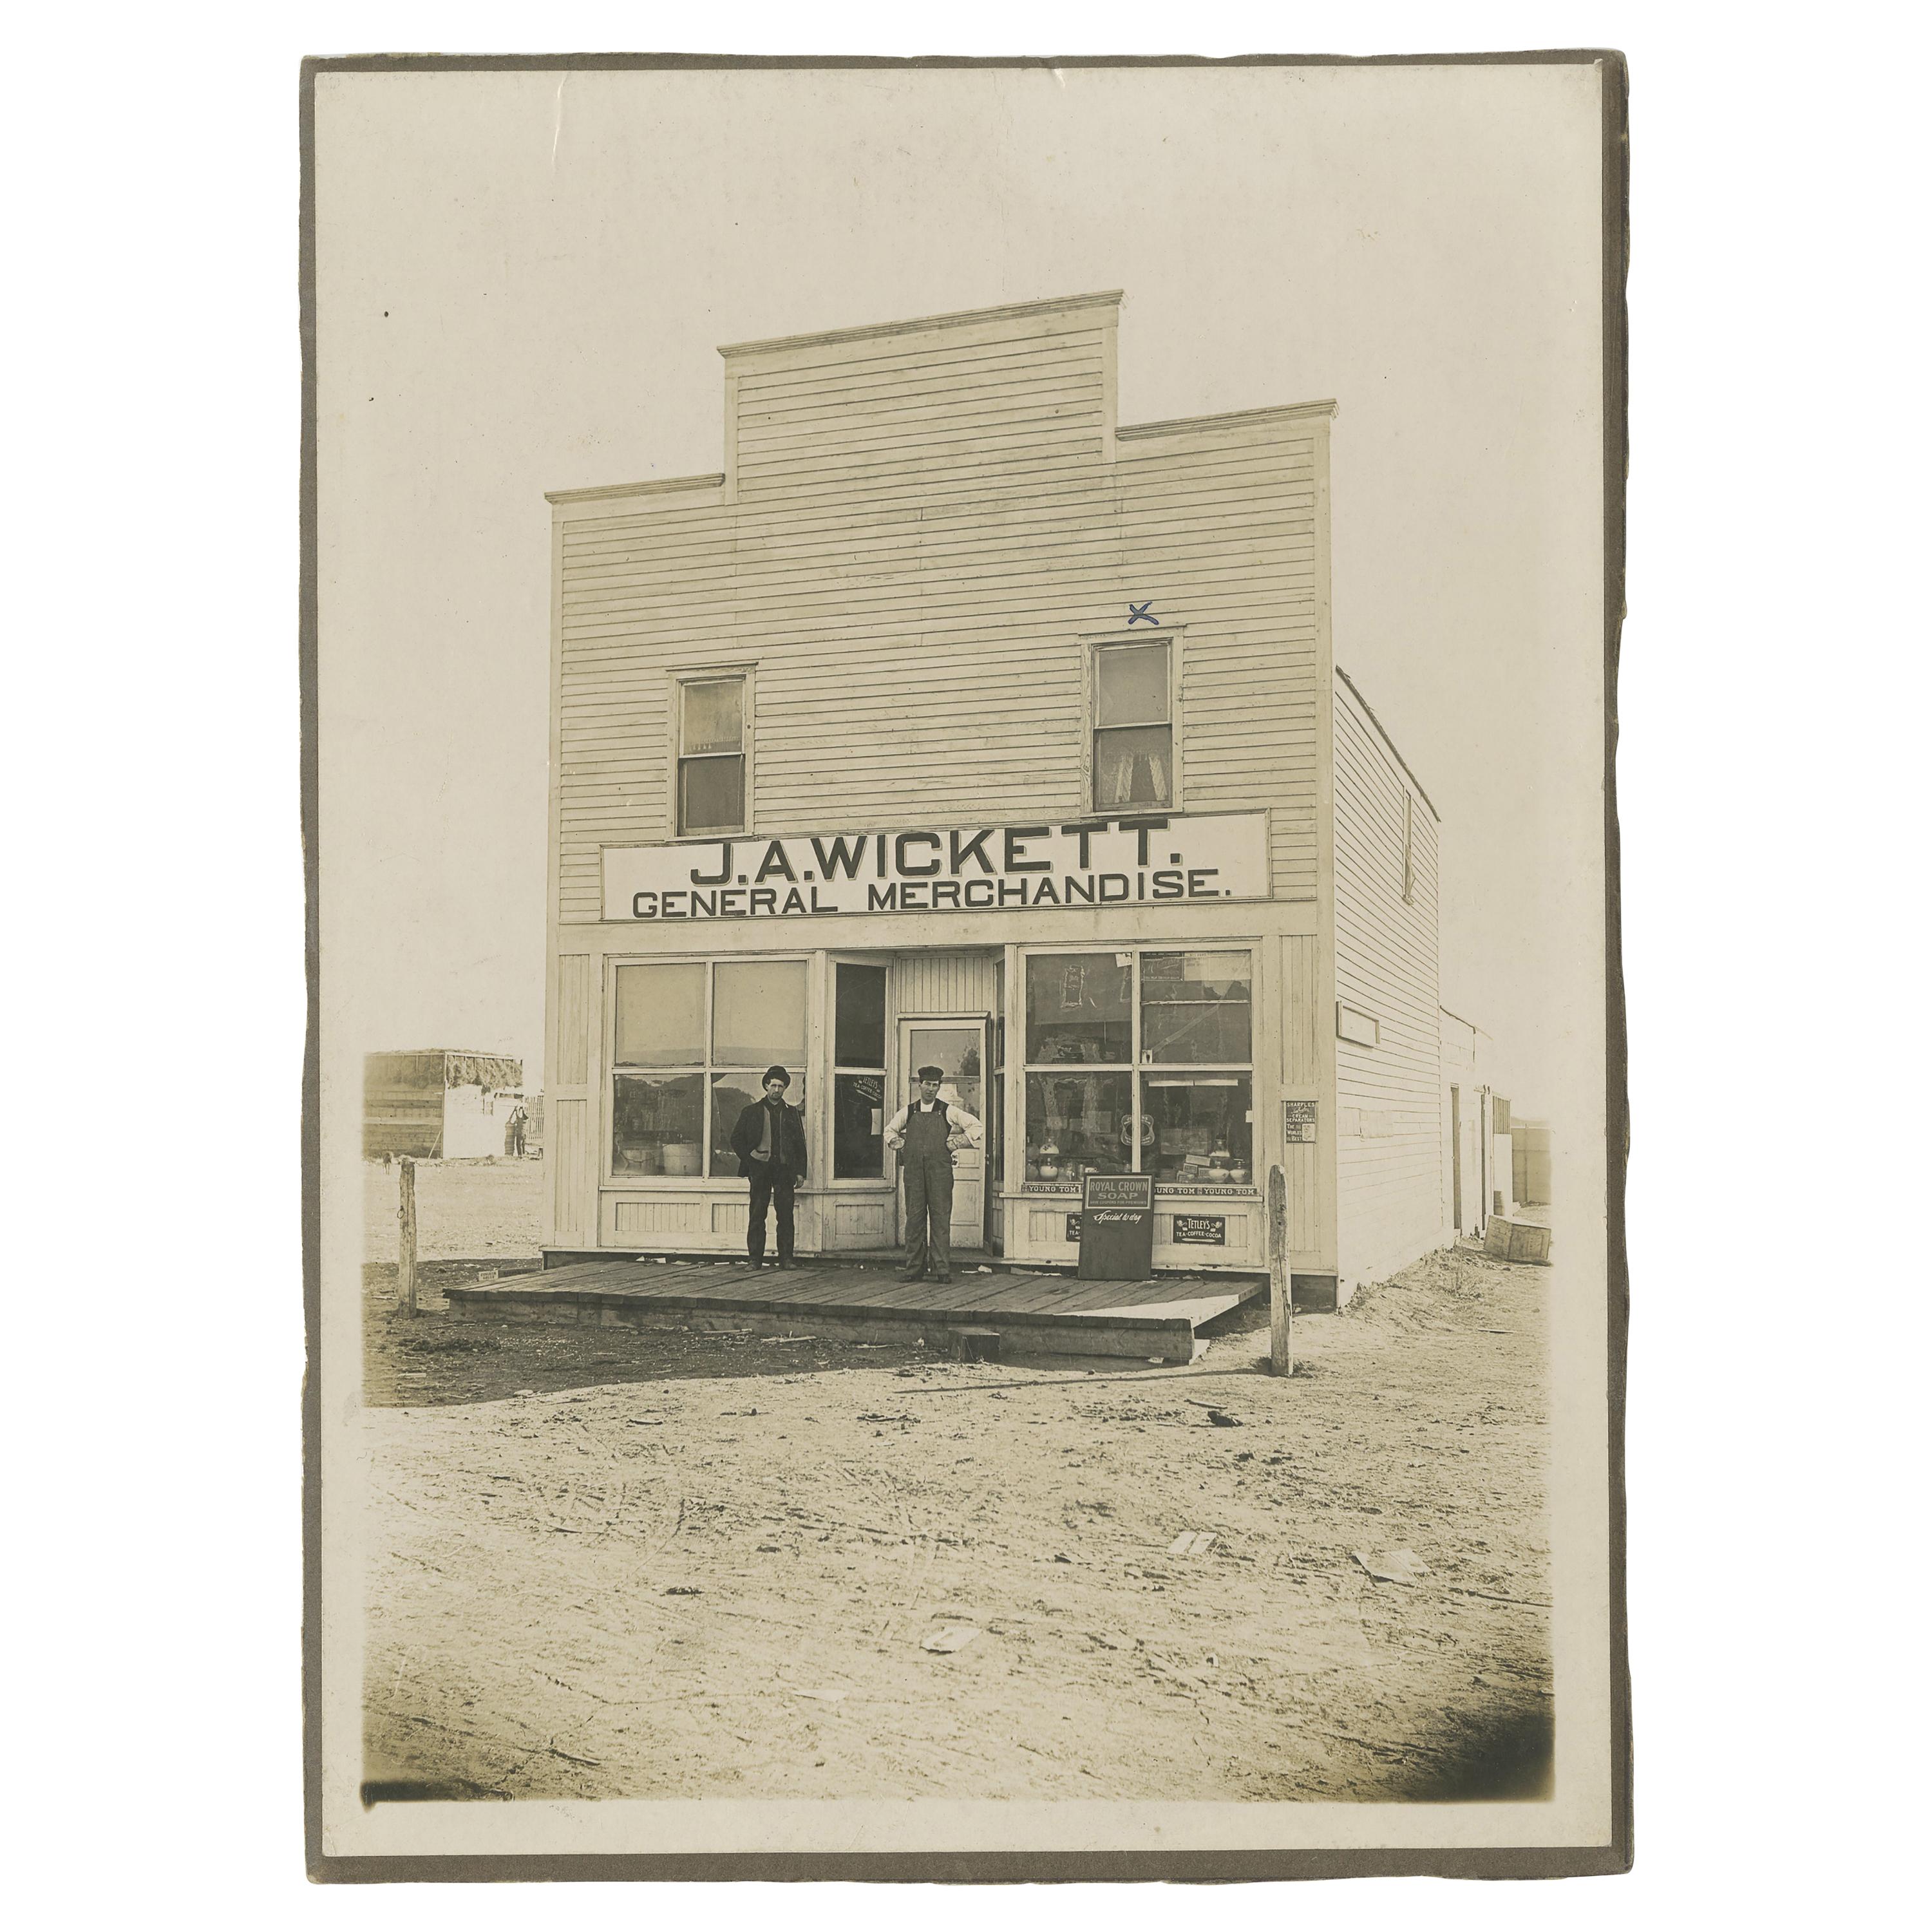 Antique Silverprint of Two Men in Front of Merchandise Store 'J.A. Wickett' For Sale